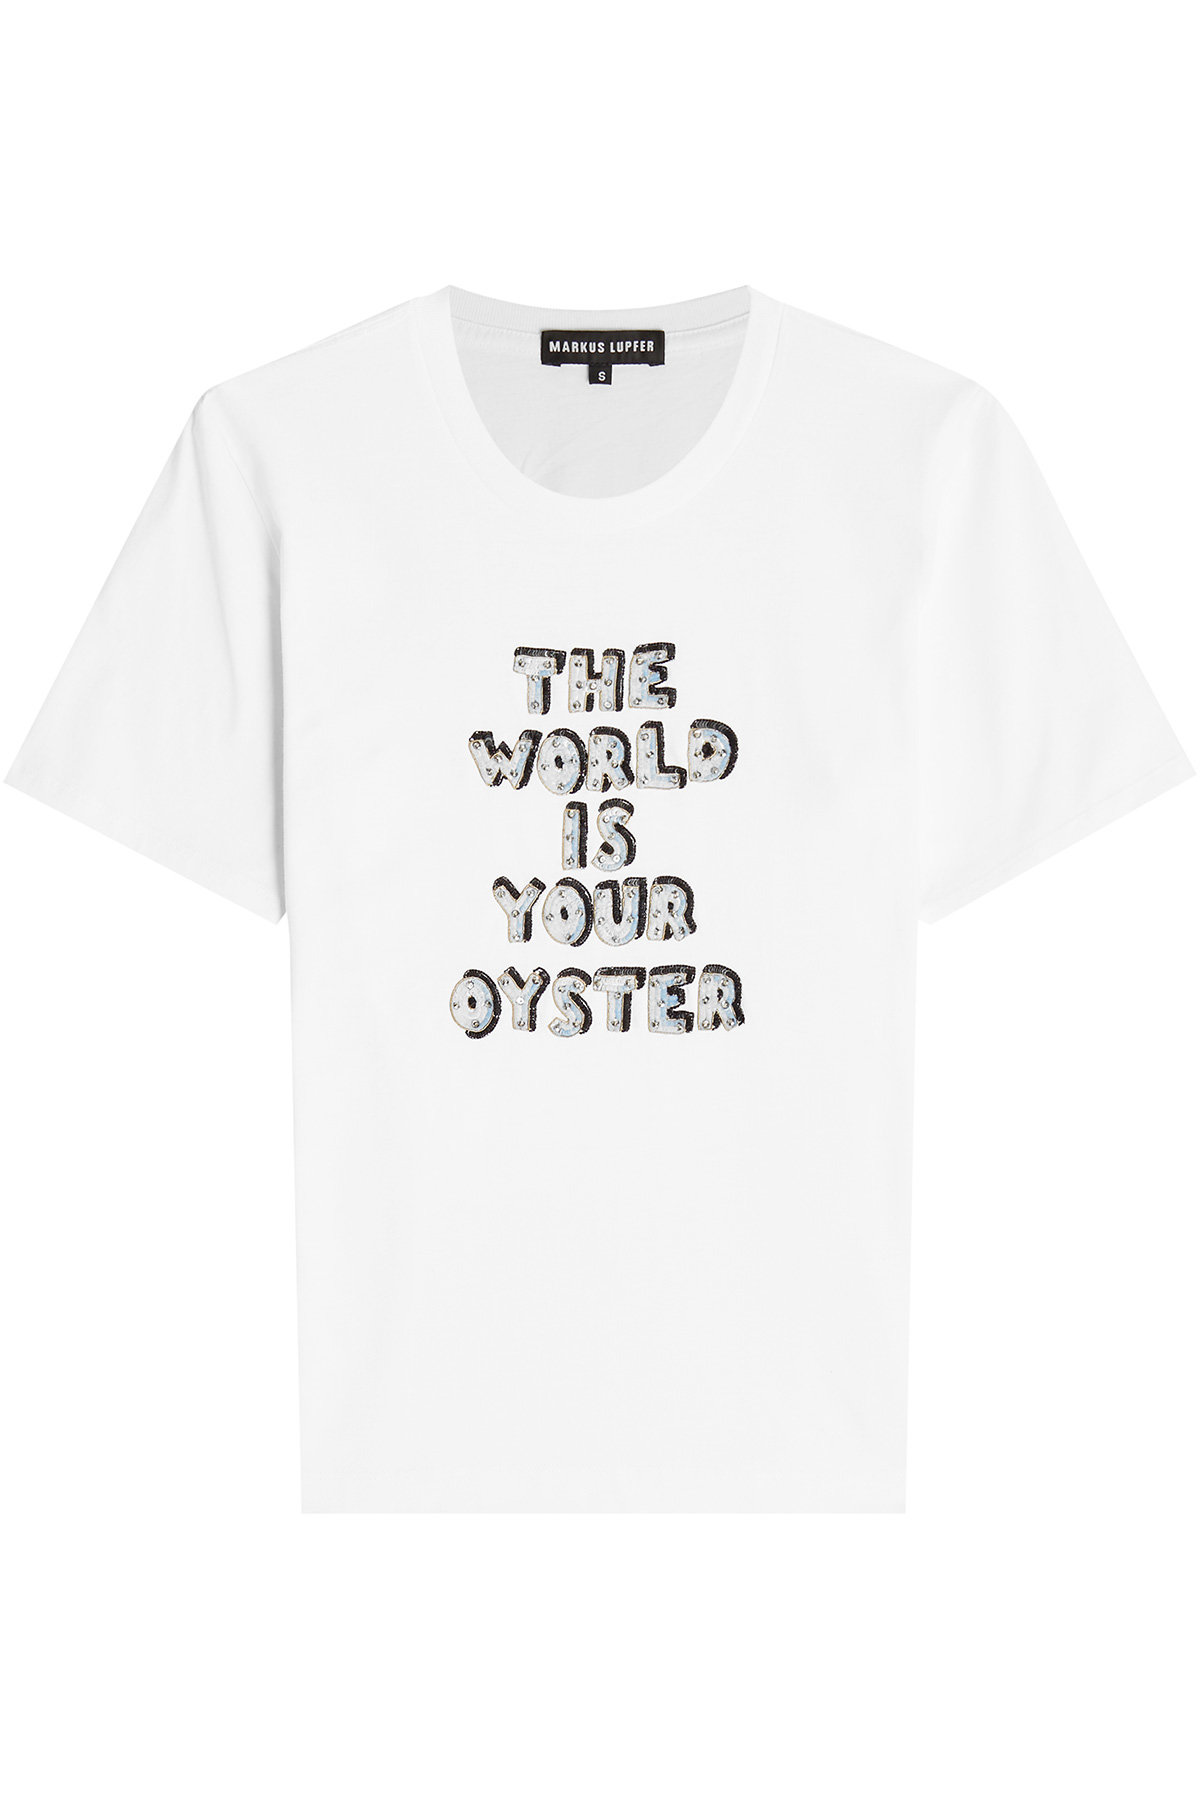 Markus Lupfer - The World is Your Oyster Printed Cotton T-Shirt